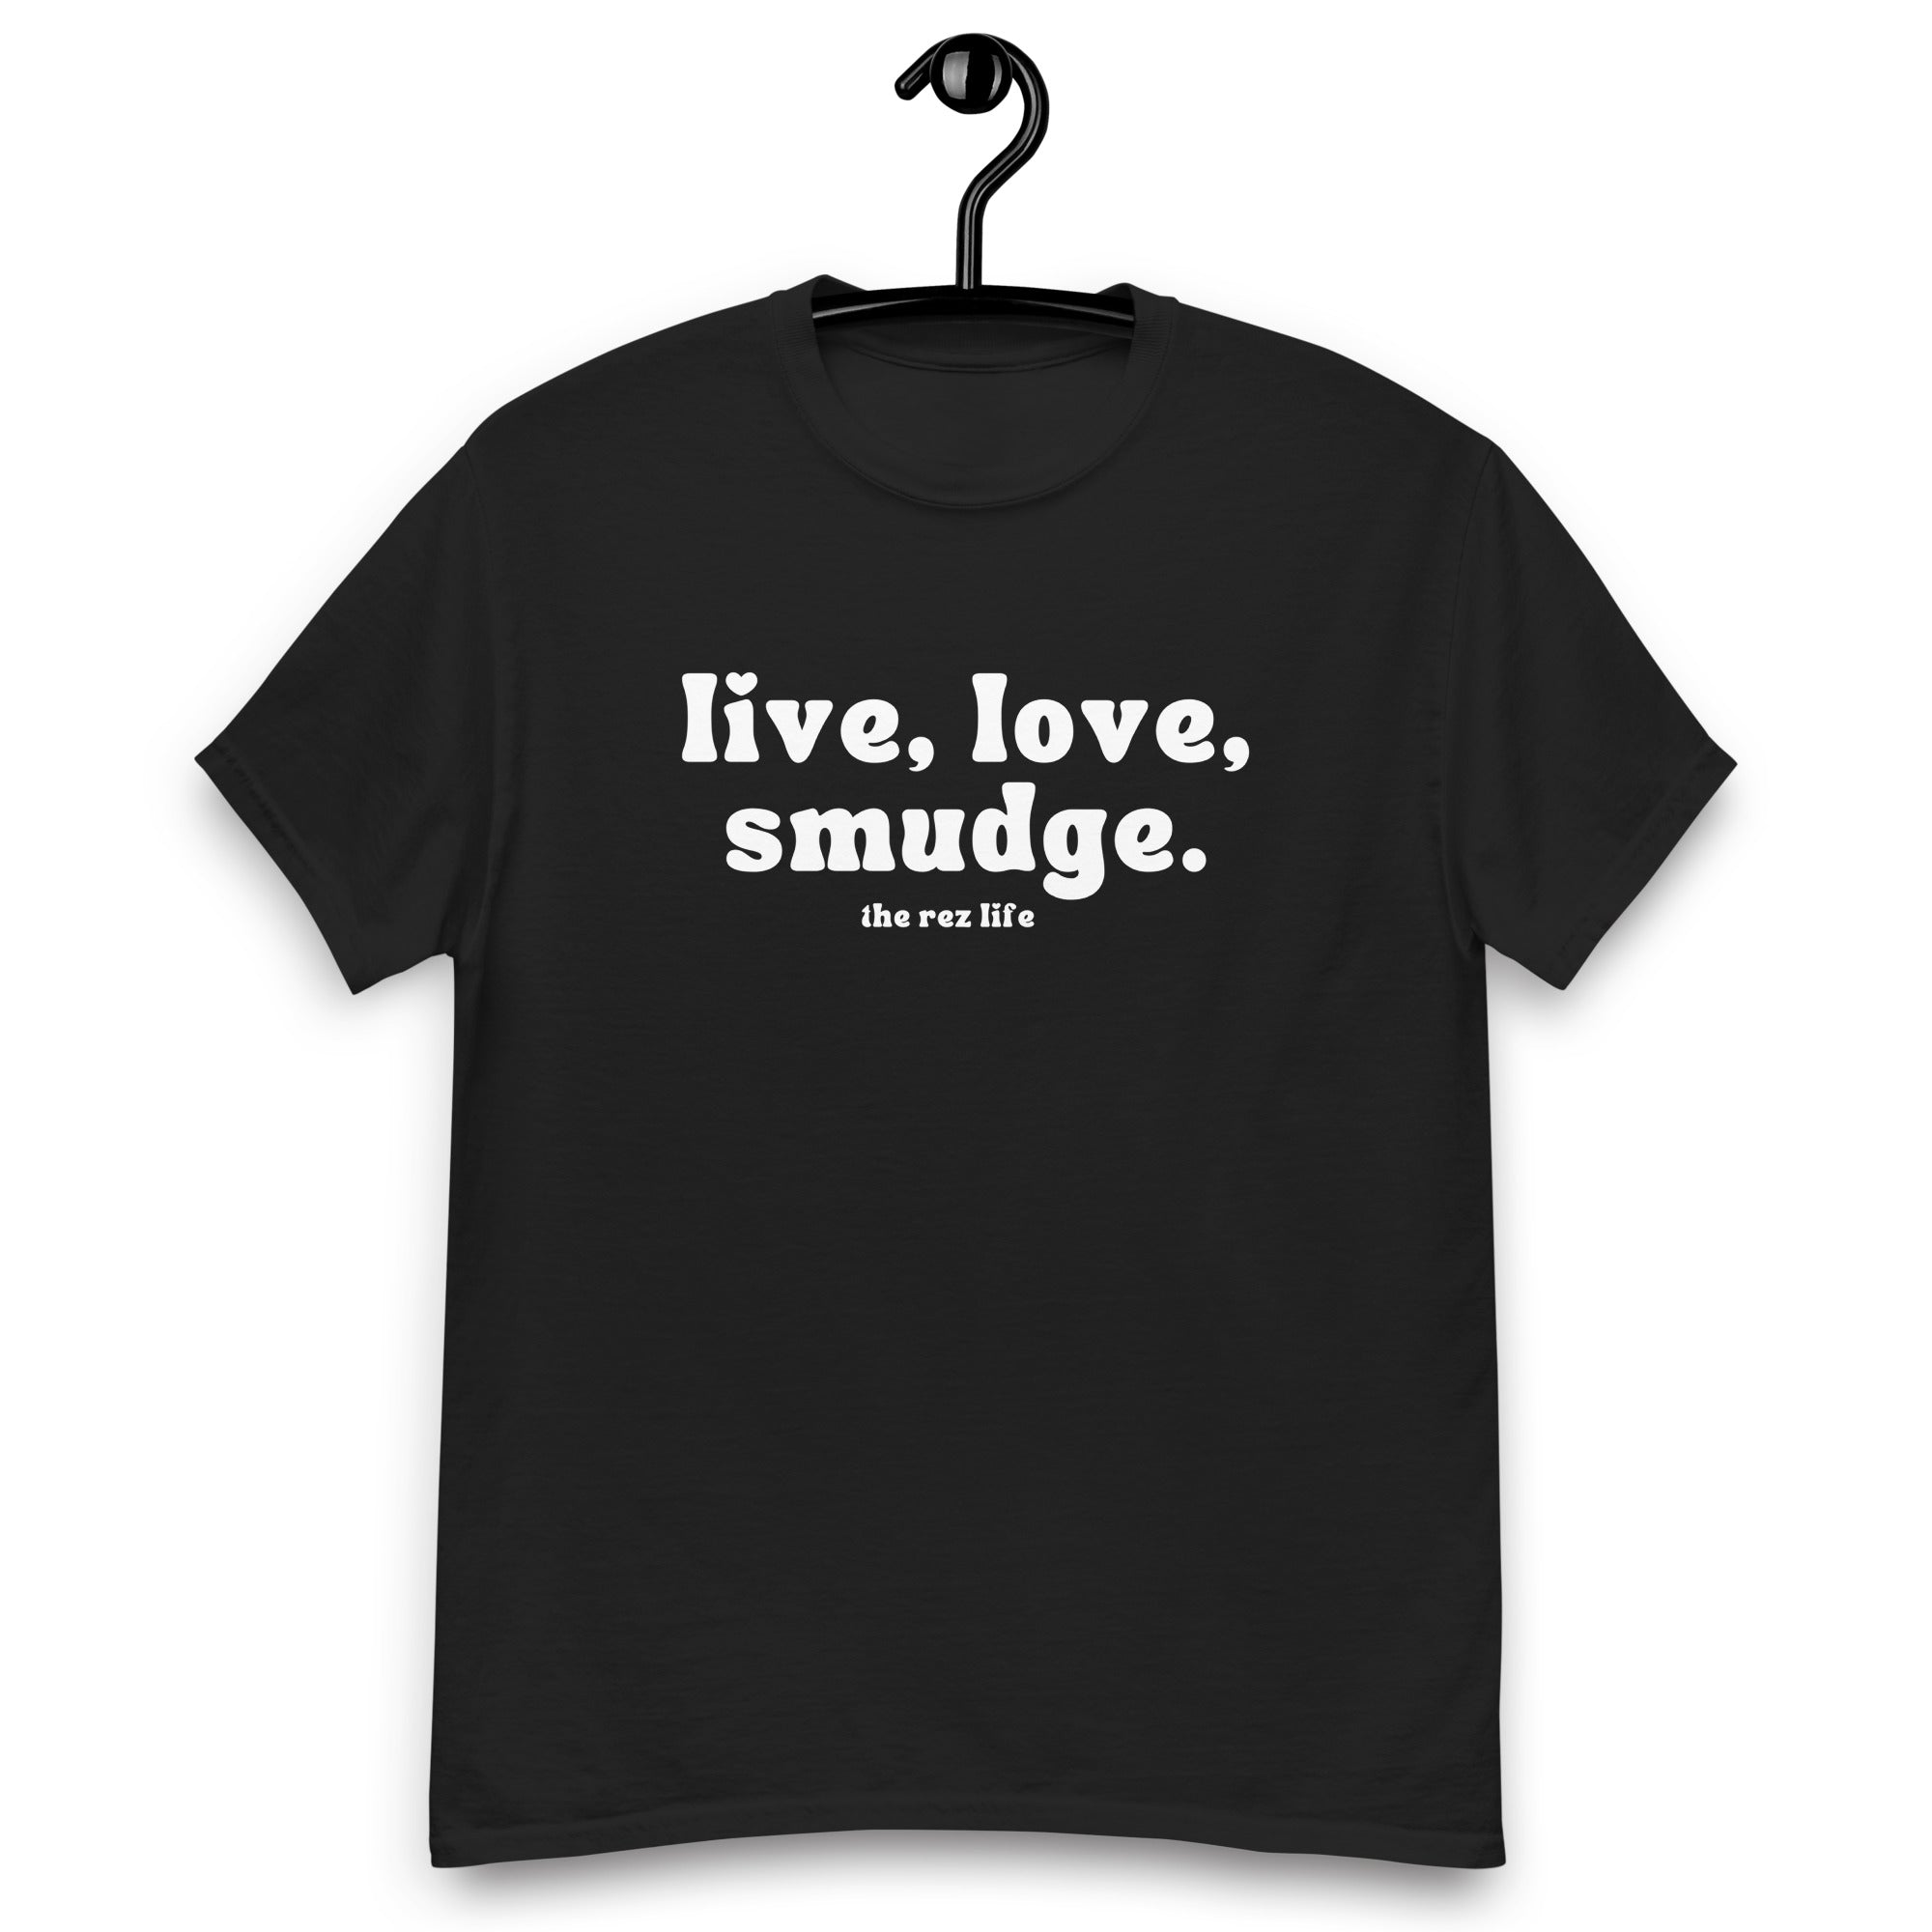 This Is The Way to Live, Love, Smudge! Men's Tee